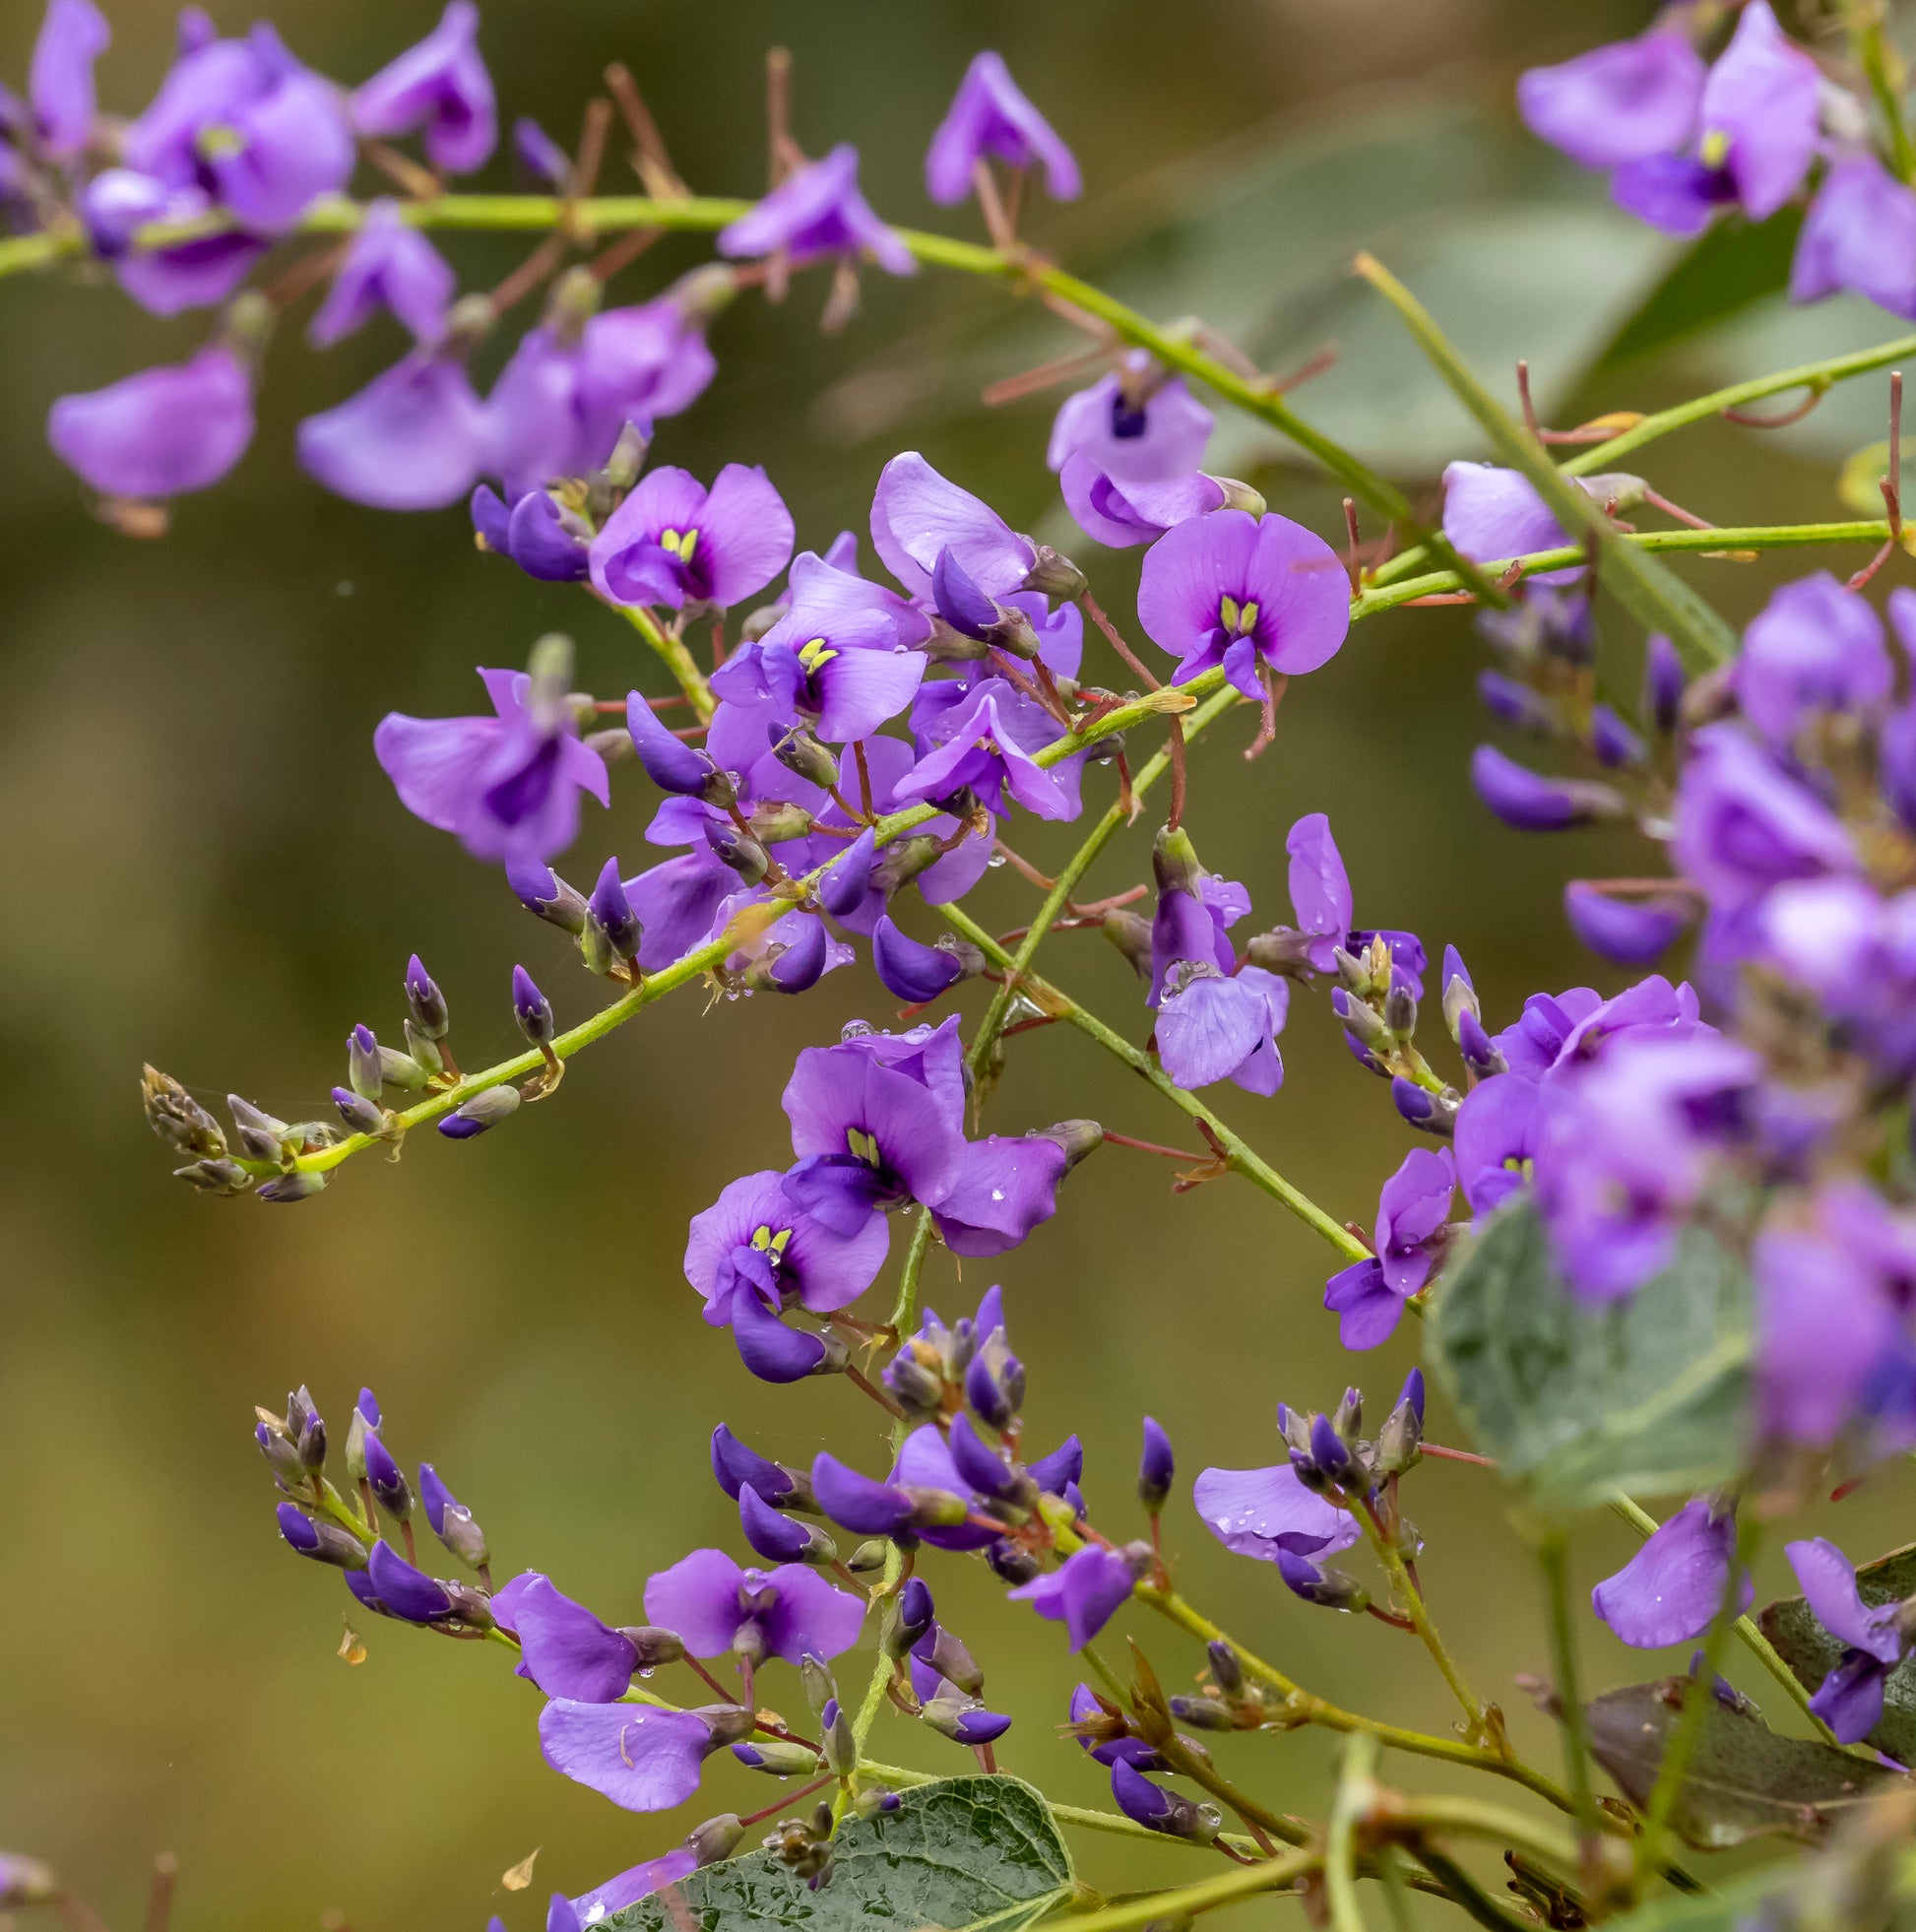 Image of the purple and yellow flowers of the Hardenbergia violacea 